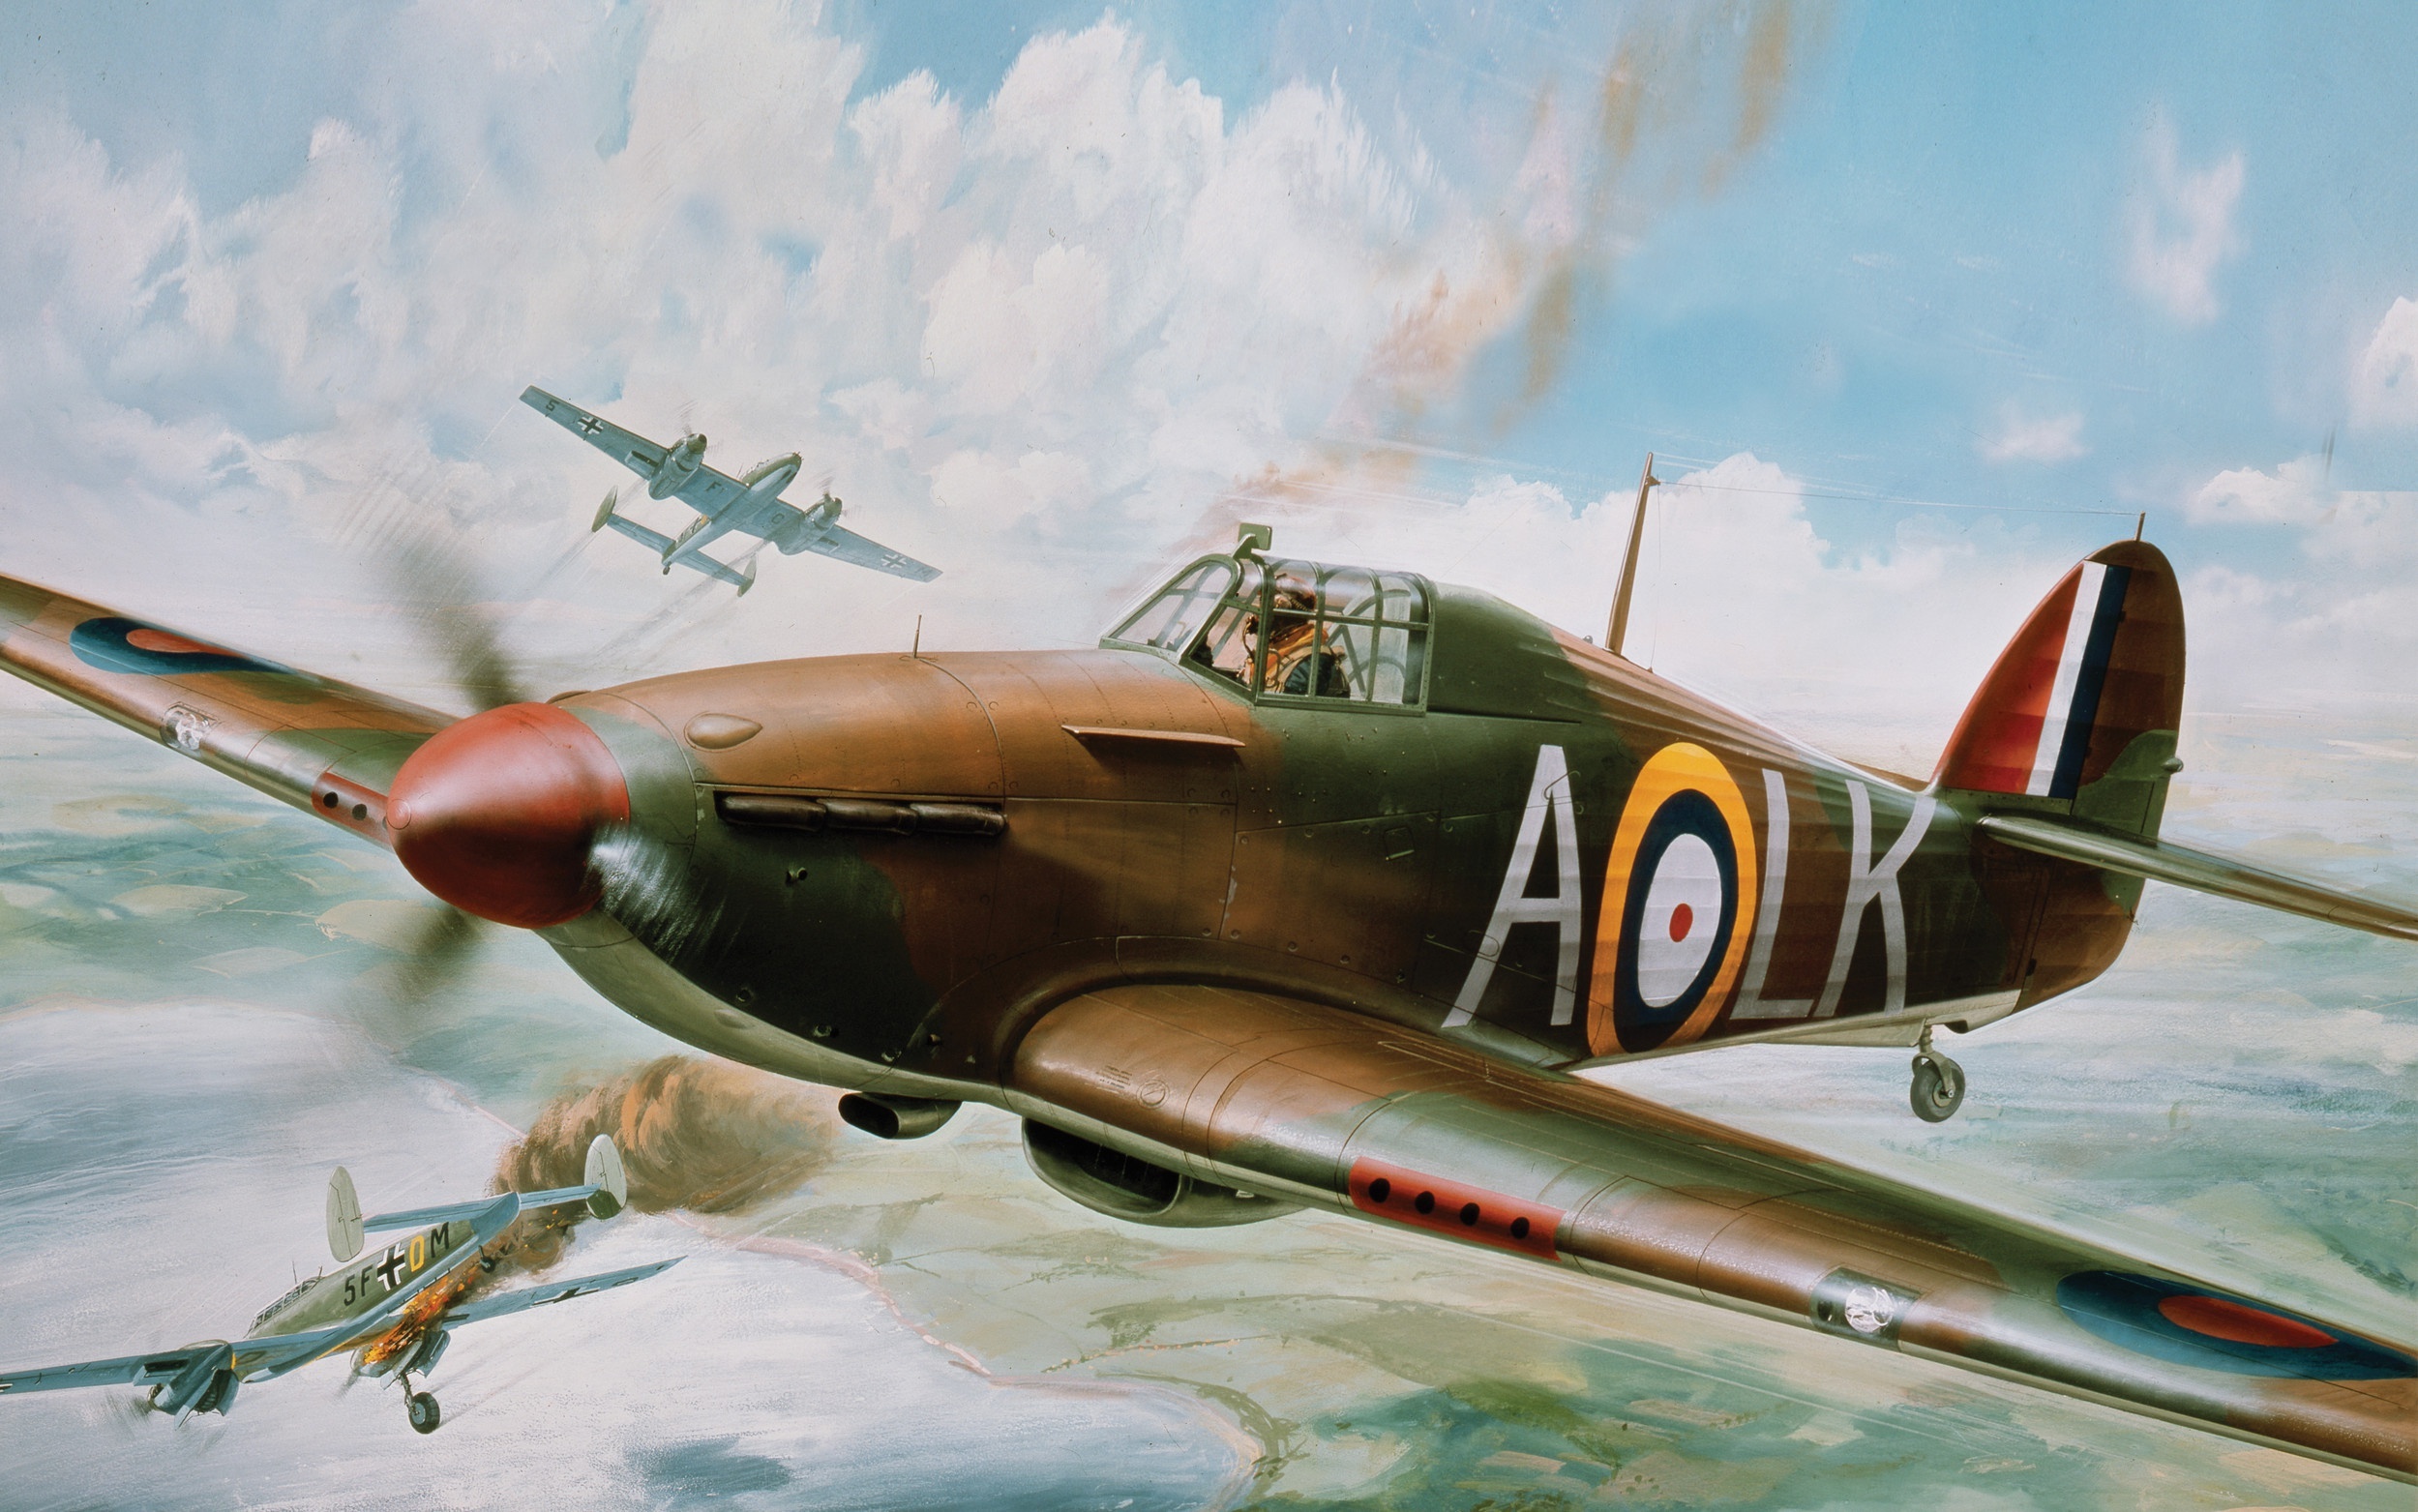 Hawker Hurricane, HD wallpapers, Aviation images, High-quality pictures, 2500x1570 HD Desktop